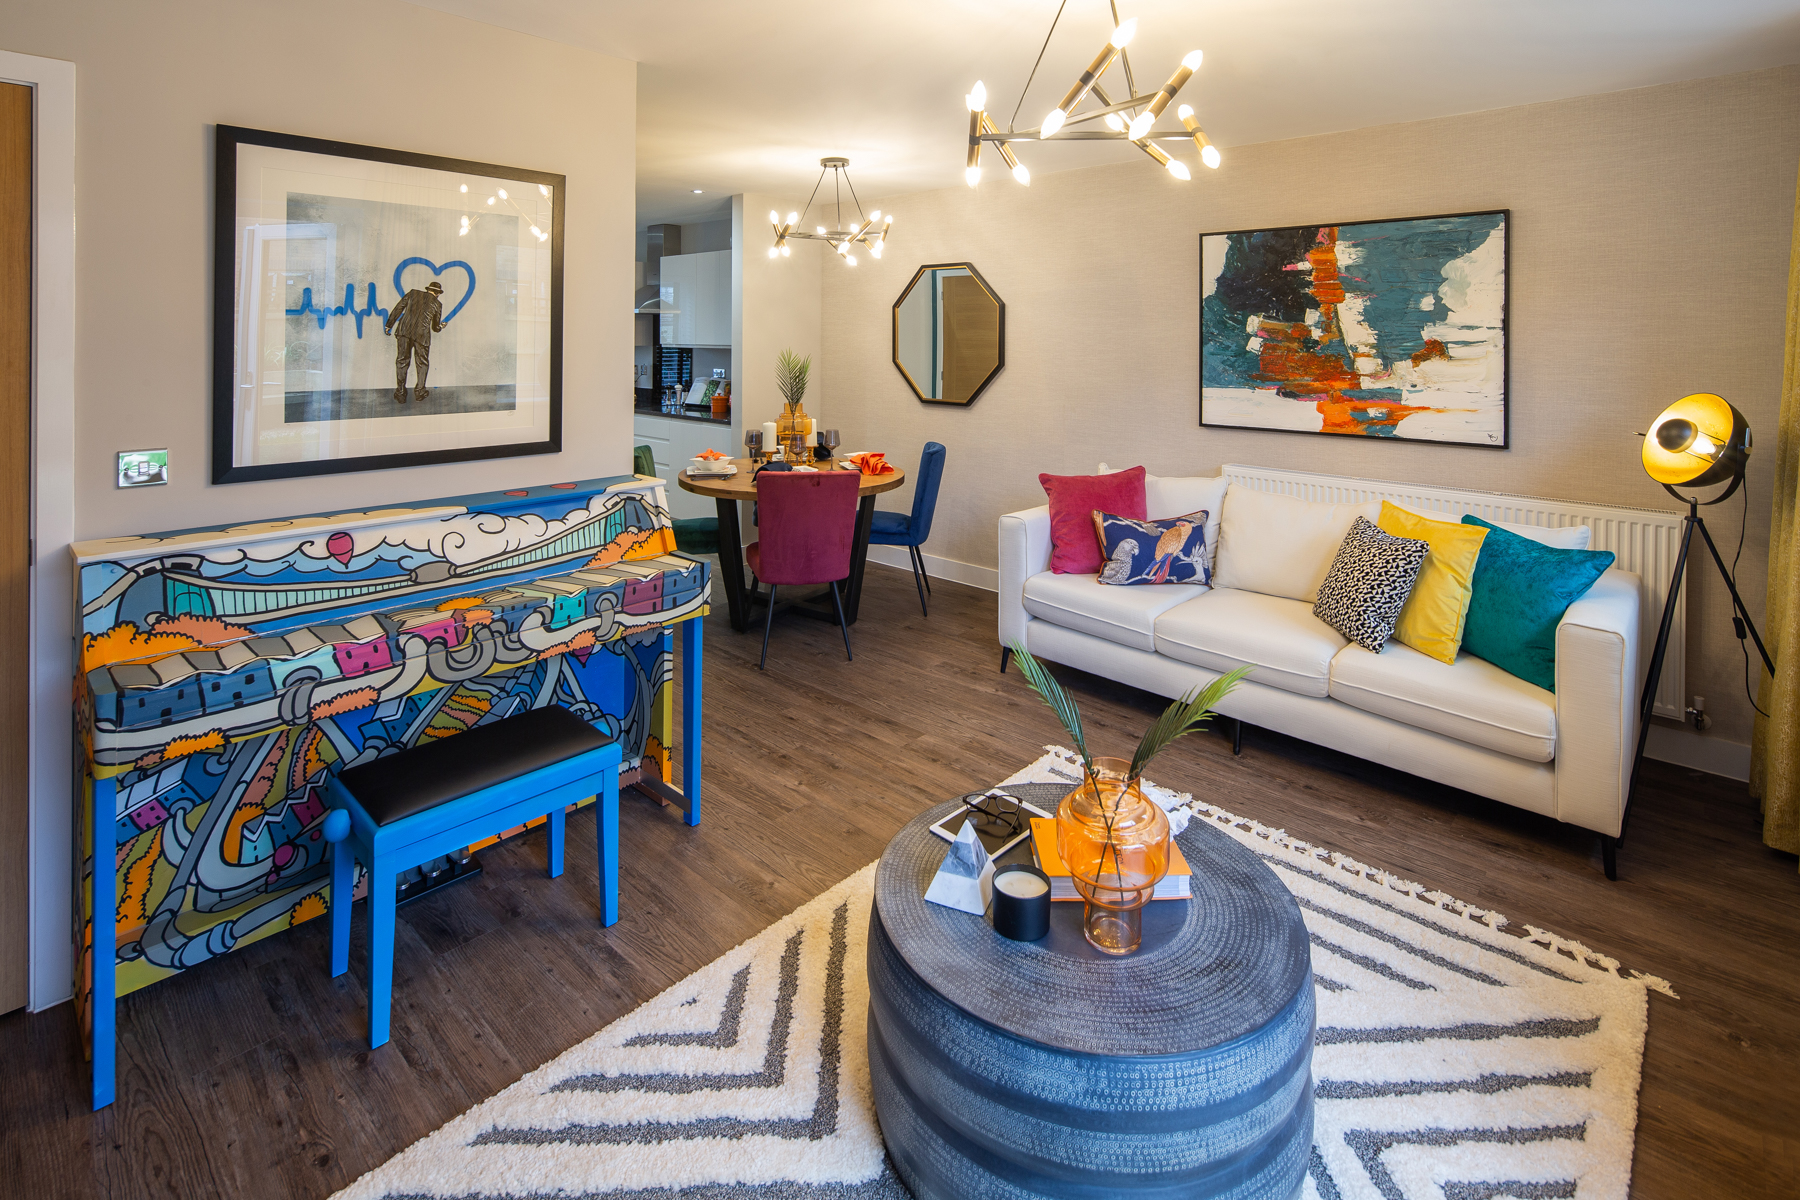 Curo launch a show home like no other at Century Park development in Bristol